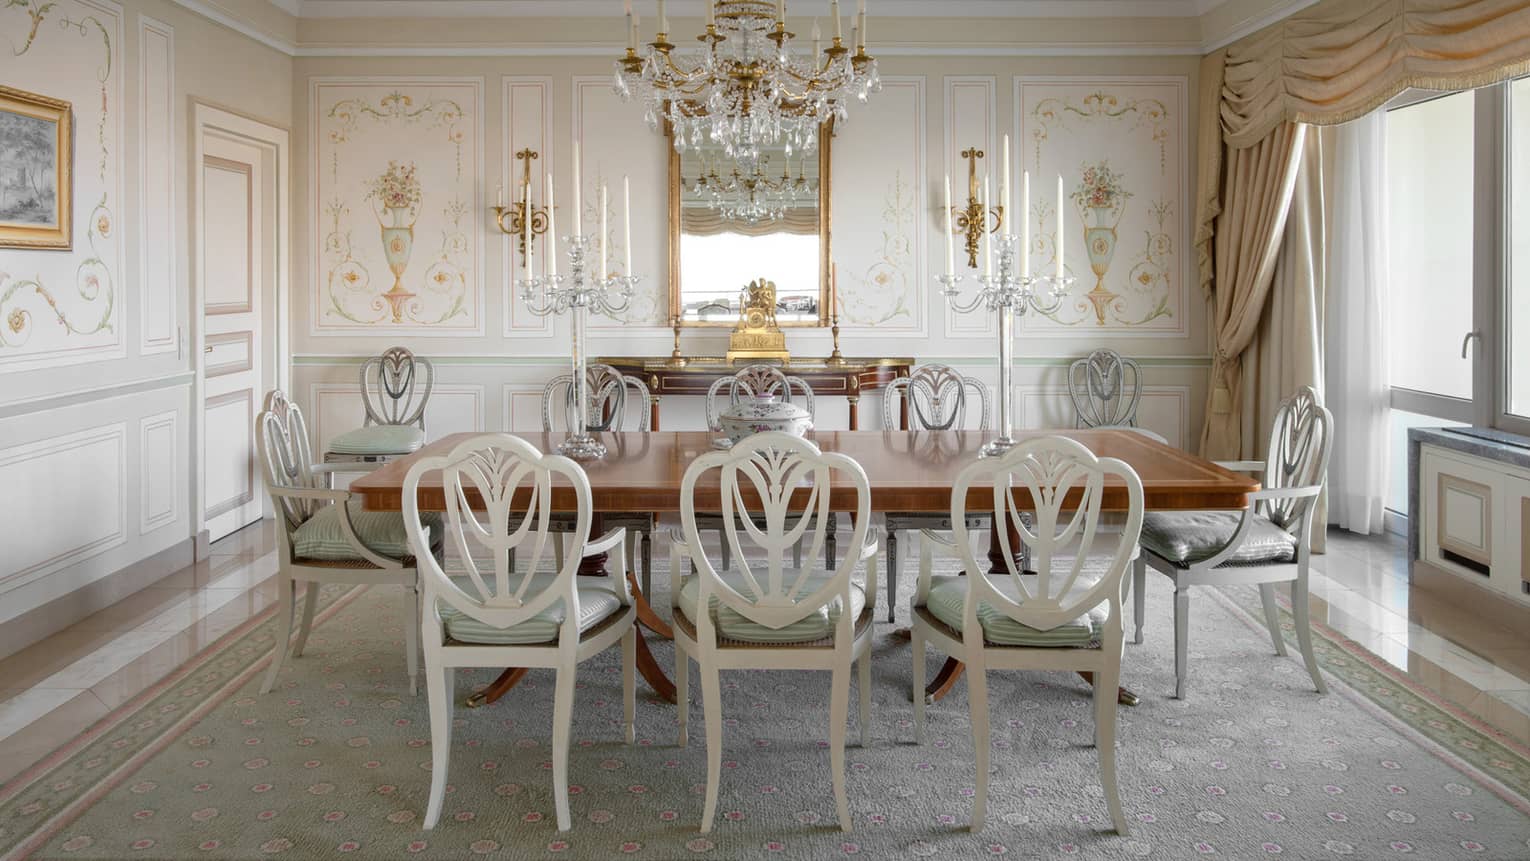 Presidential Suite formal dining room with chandelier over rectangular wooden table and white chairs